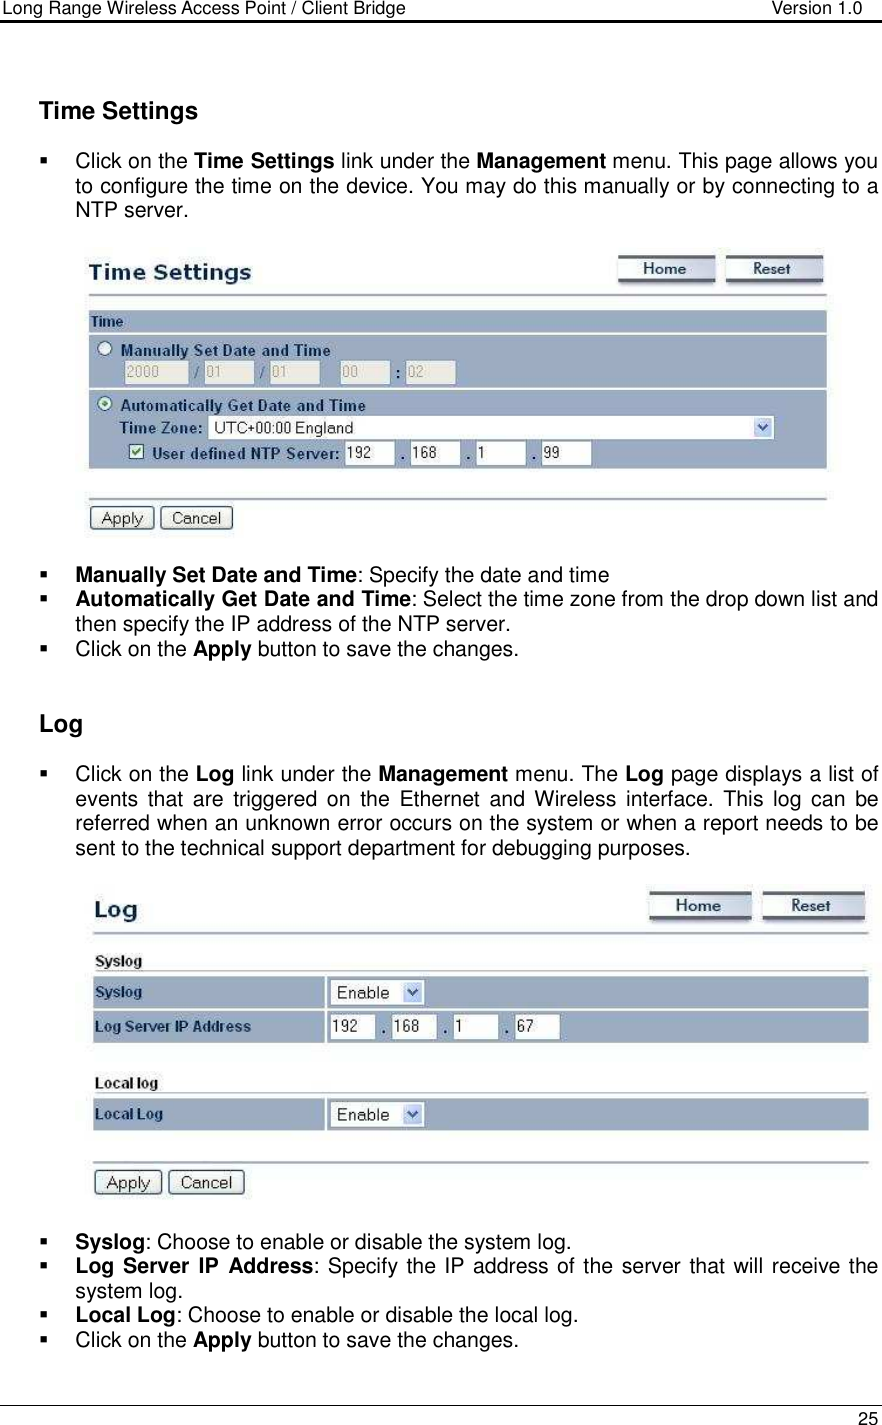 Long Range Wireless Access Point / Client Bridge                                   Version 1.0    25       Time Settings   Click on the Time Settings link under the Management menu. This page allows you to configure the time on the device. You may do this manually or by connecting to a NTP server.       Manually Set Date and Time: Specify the date and time  Automatically Get Date and Time: Select the time zone from the drop down list and then specify the IP address of the NTP server.    Click on the Apply button to save the changes.      Log   Click on the Log link under the Management menu. The Log page displays a list of events  that  are  triggered  on  the  Ethernet  and Wireless  interface.  This log  can  be referred when an unknown error occurs on the system or when a report needs to be sent to the technical support department for debugging purposes.      Syslog: Choose to enable or disable the system log.  Log Server IP Address: Specify the IP address of the server that will receive the system log.   Local Log: Choose to enable or disable the local log.   Click on the Apply button to save the changes.   